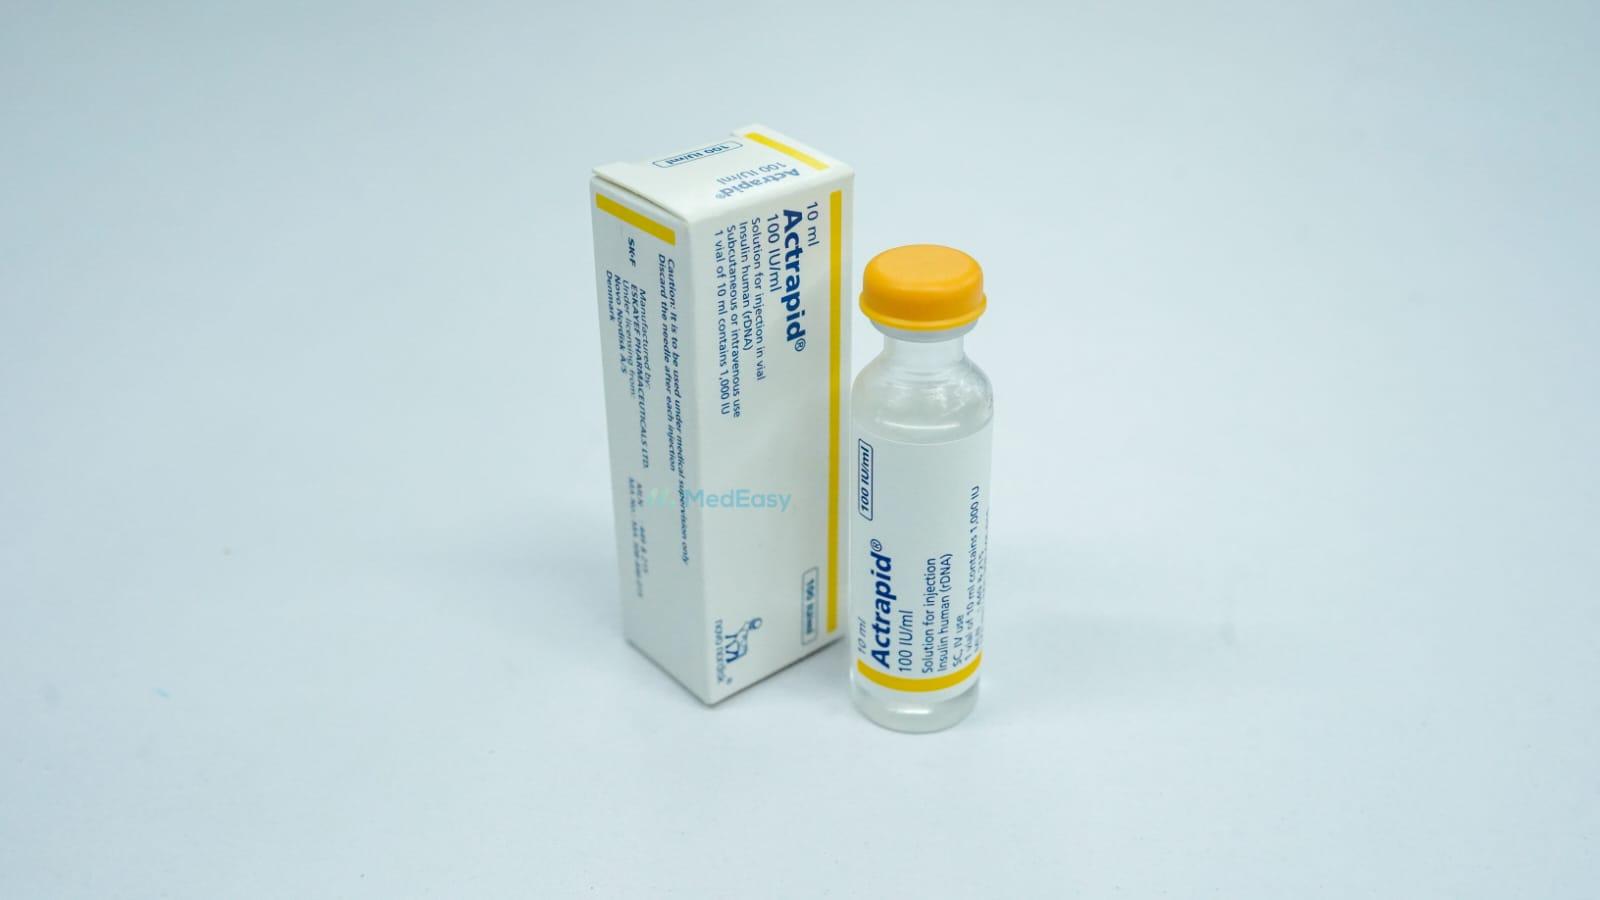 Actrapid Vial